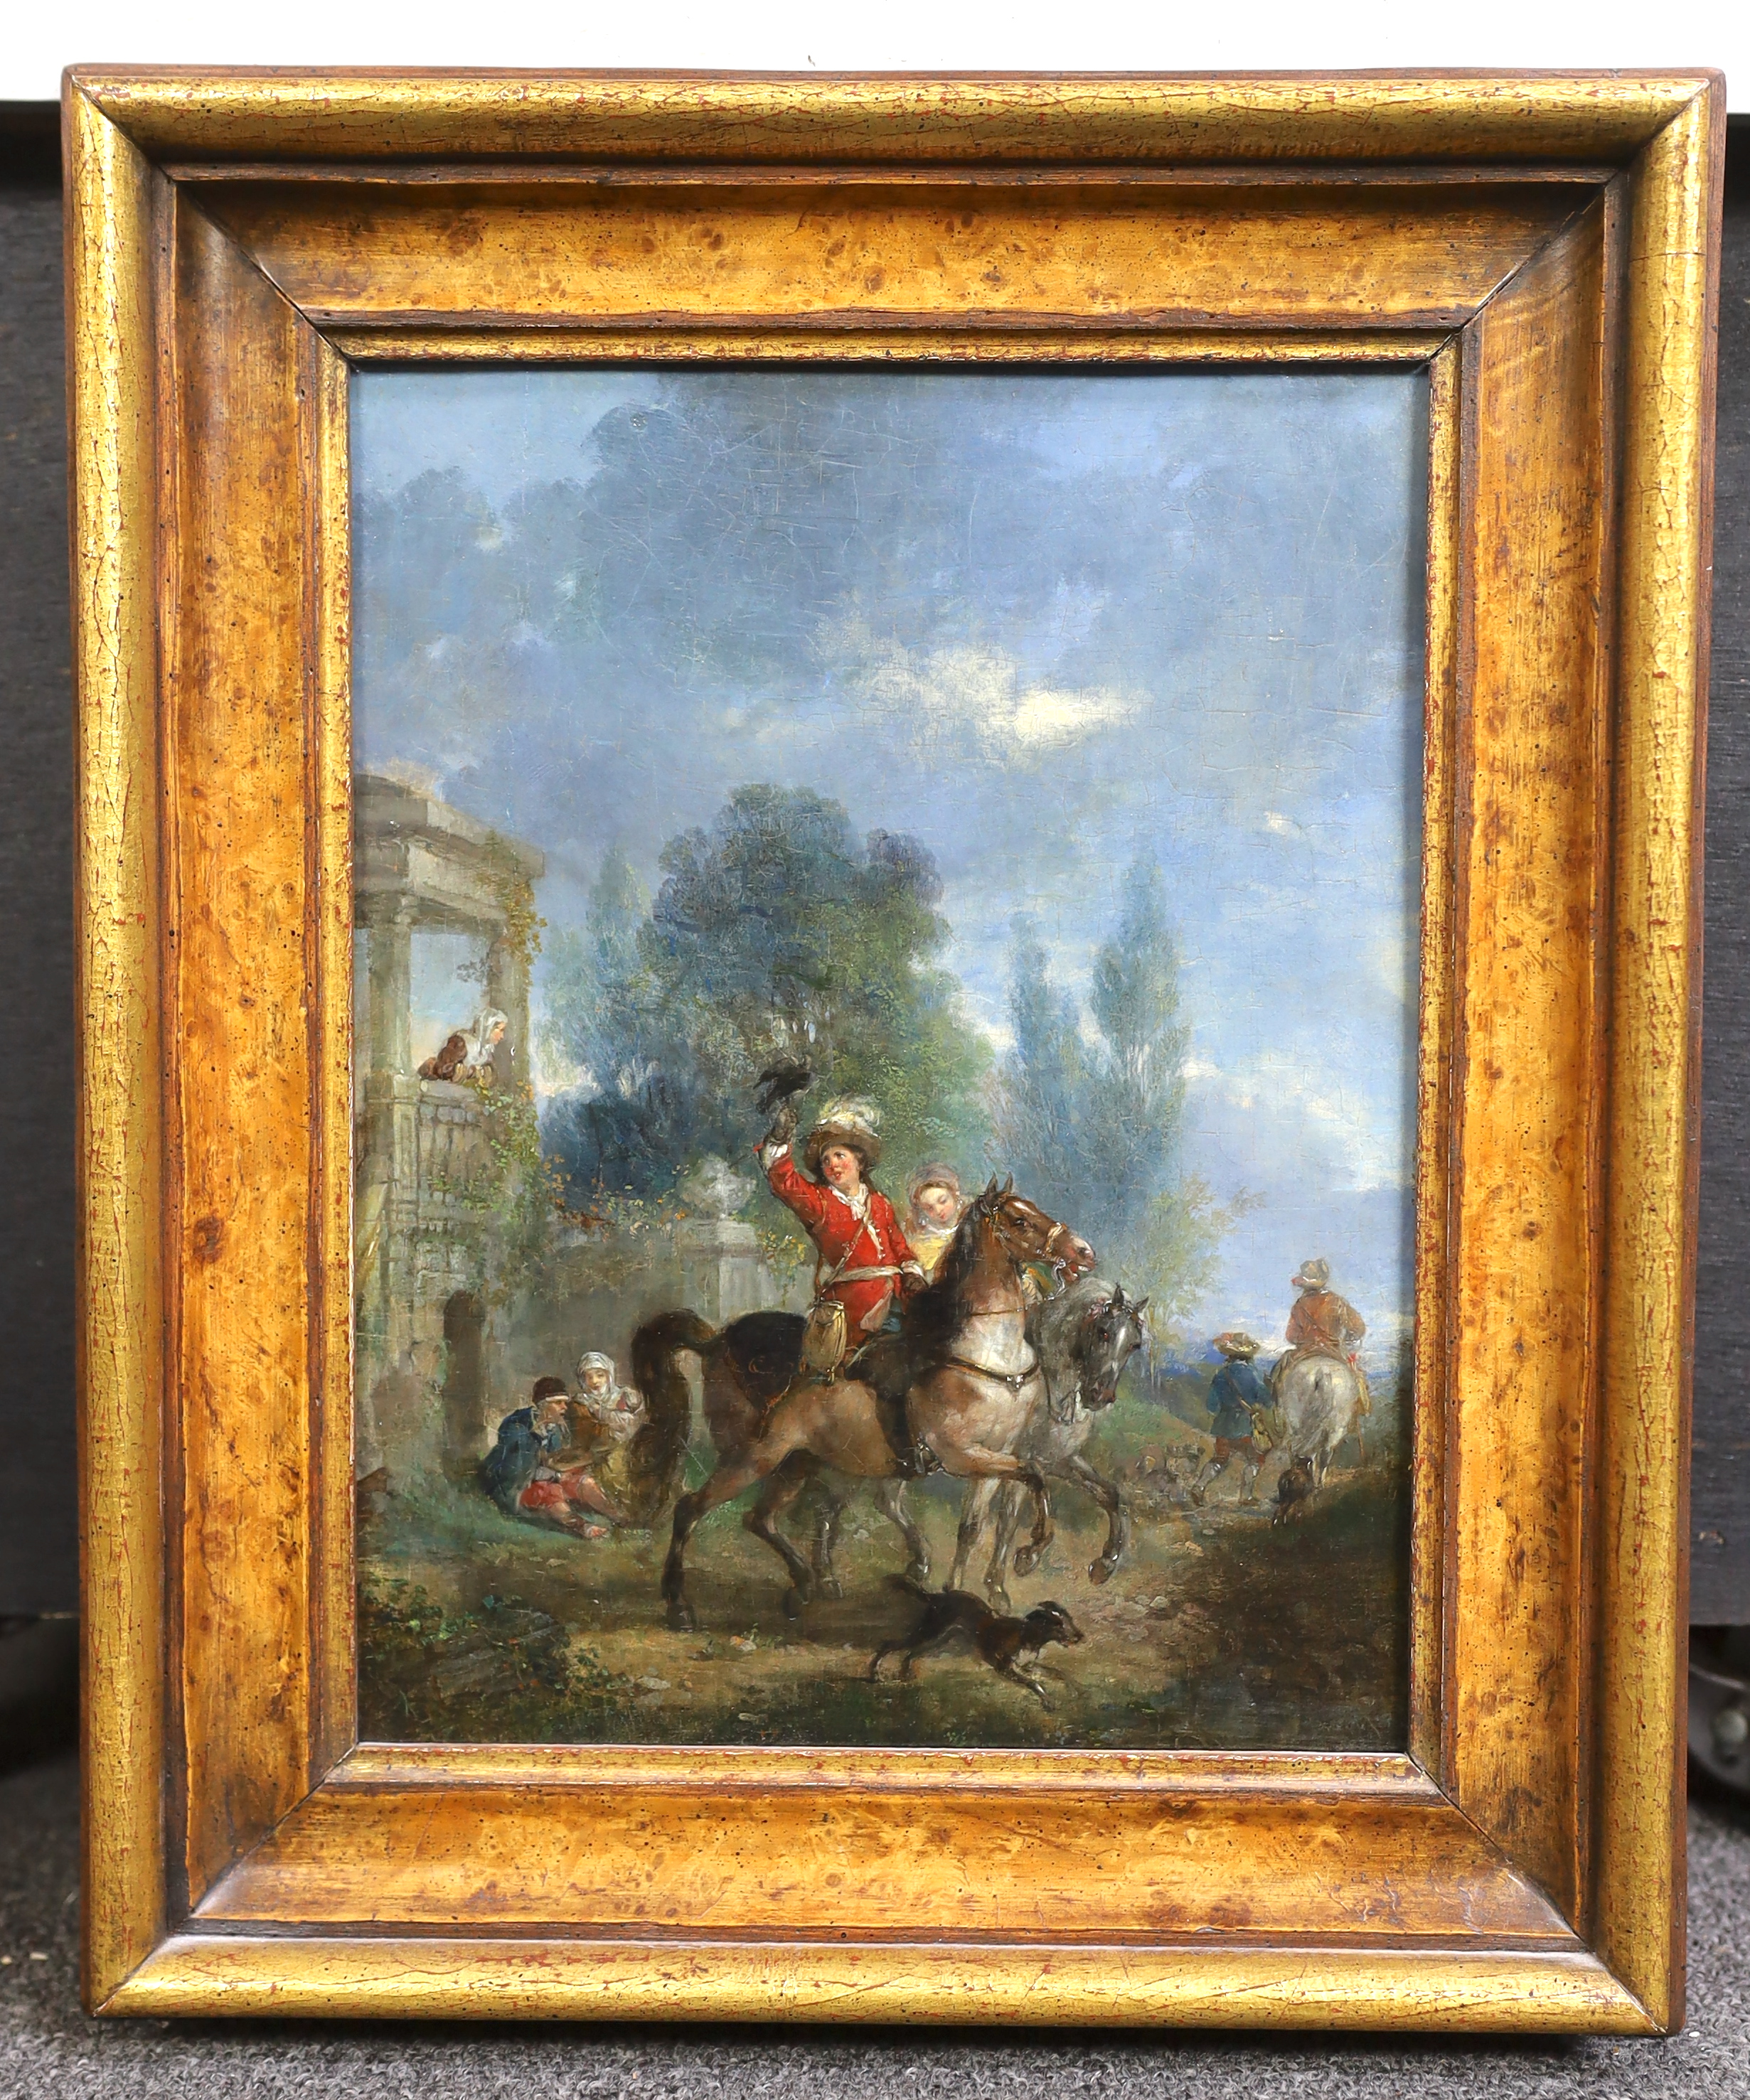 Manner of Philip Wouwerman (Haarlem, 1619-1668), A hawking party setting out, oil on wooden panel, 27 x 20cm